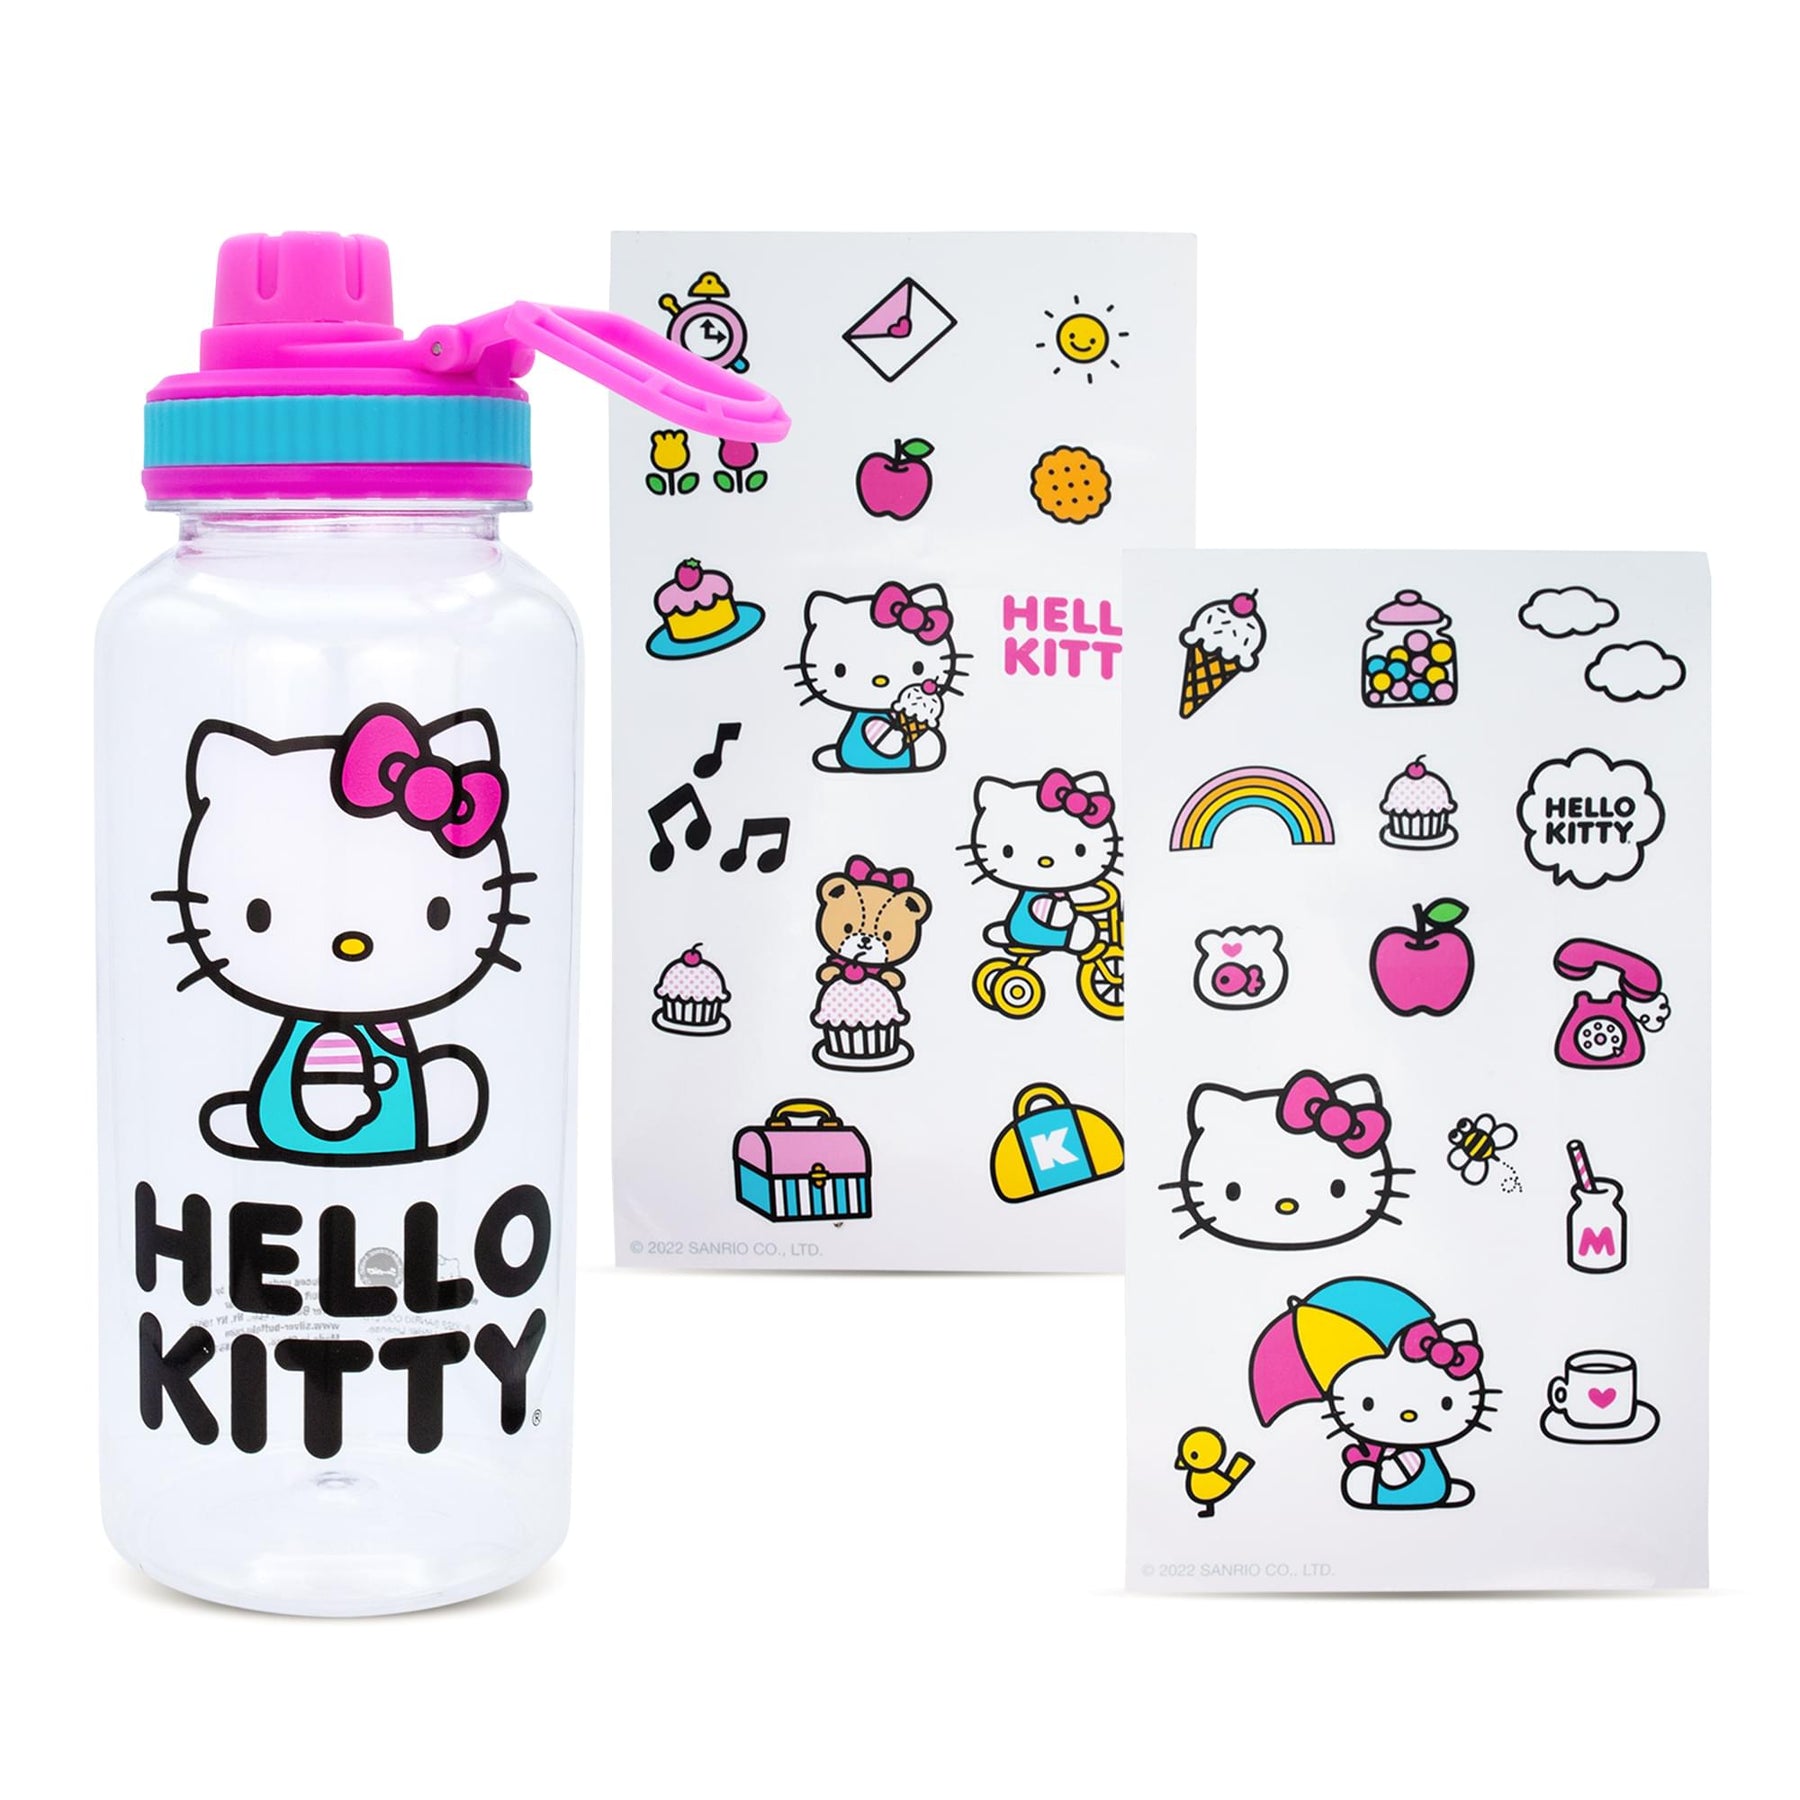 Sanrio Hello Kitty 32 Valentines - Hello Kitty 32 Valentines . Buy Hello  Kitty toys in India. shop for Sanrio products in India.